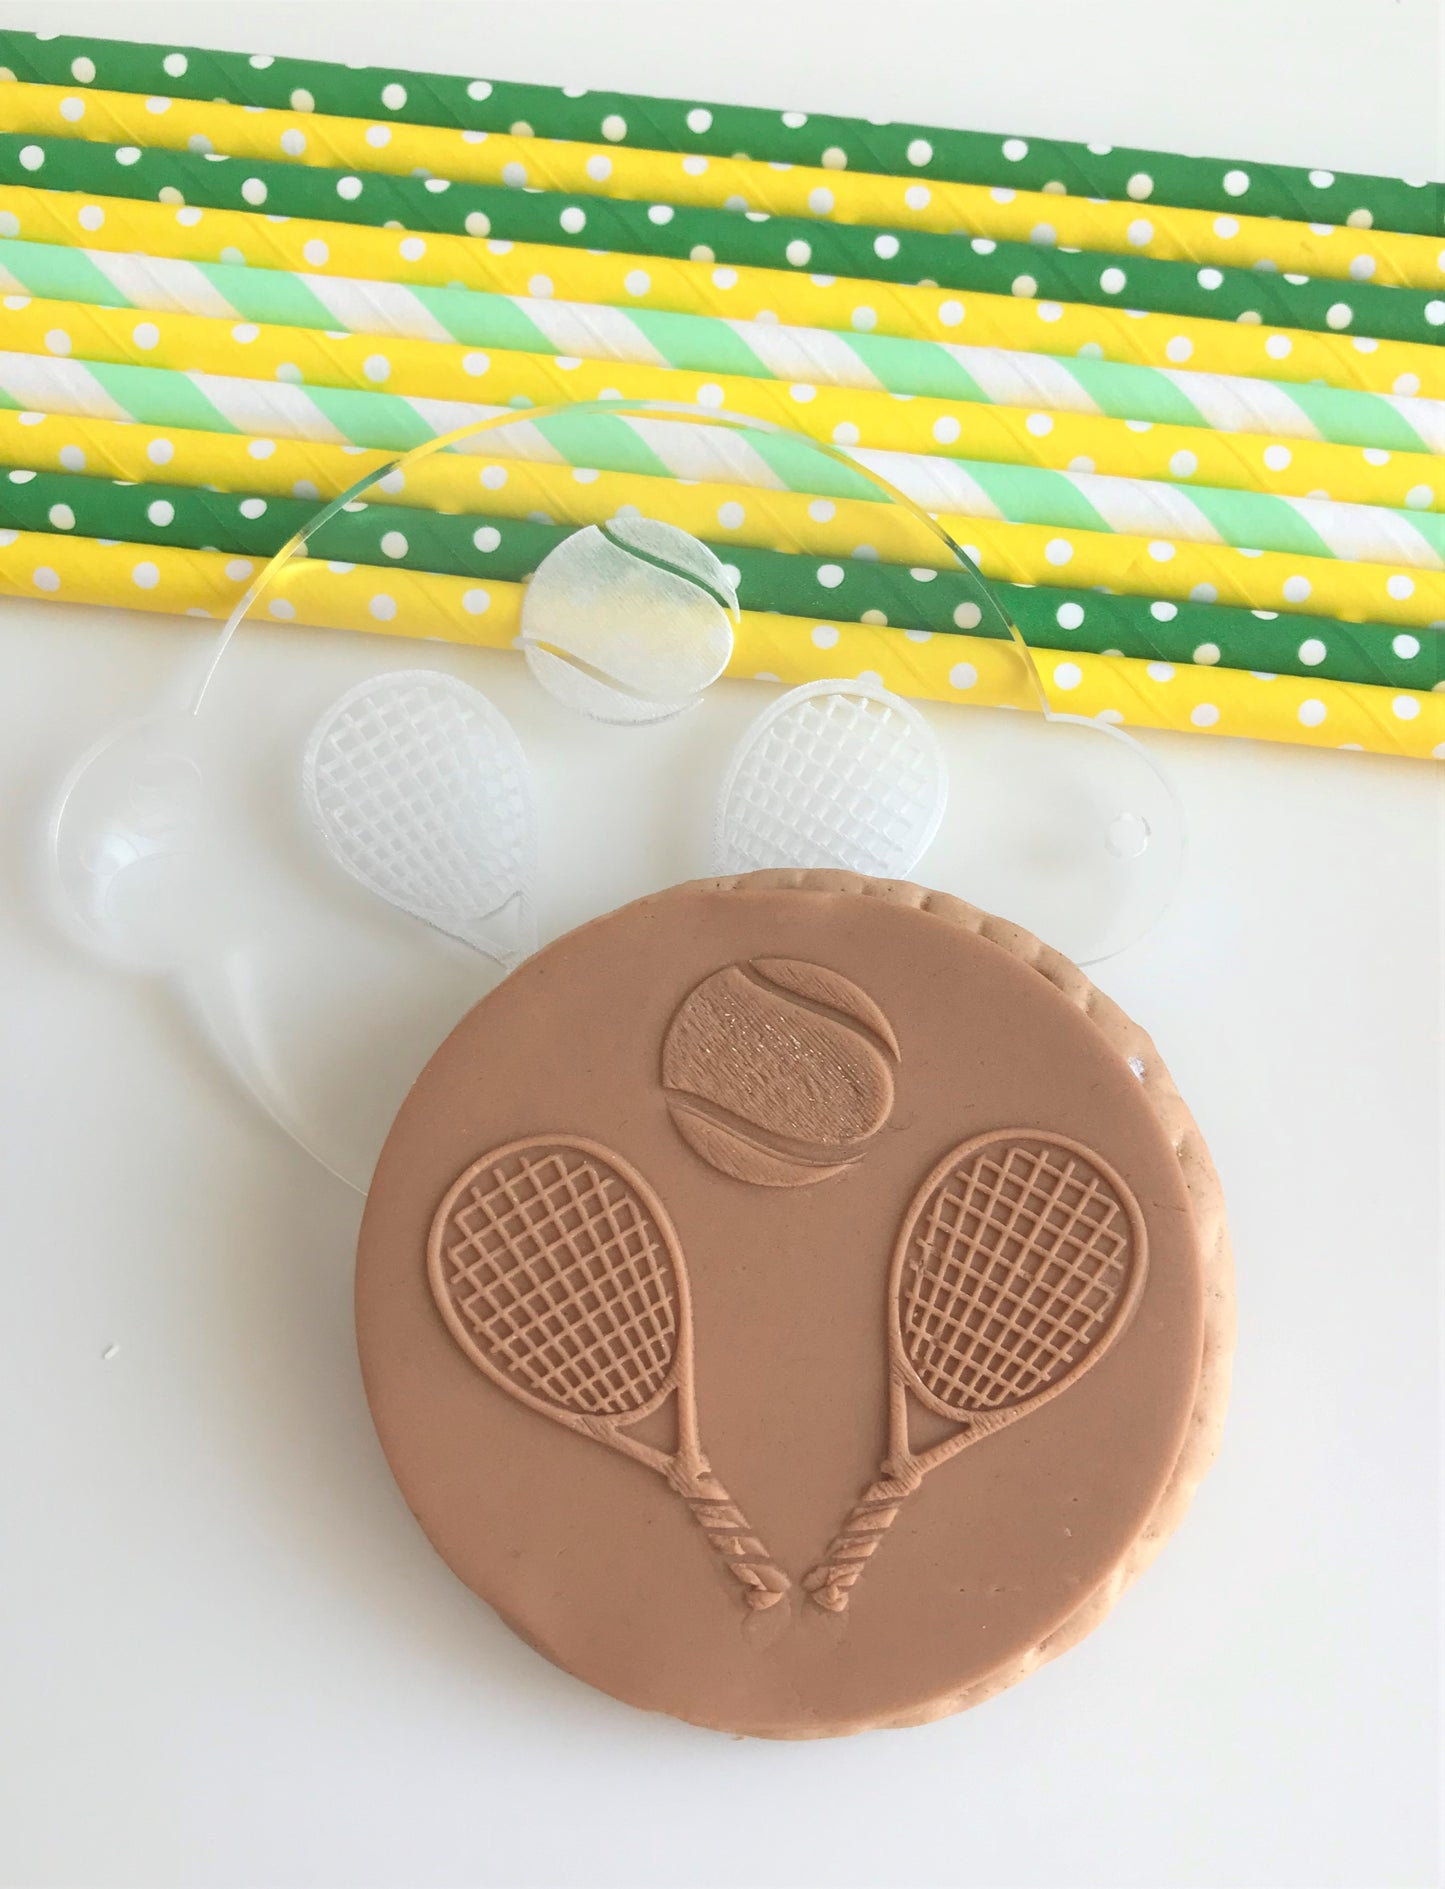 Pair of Tennis Racquets and Tennis Ball Embosser